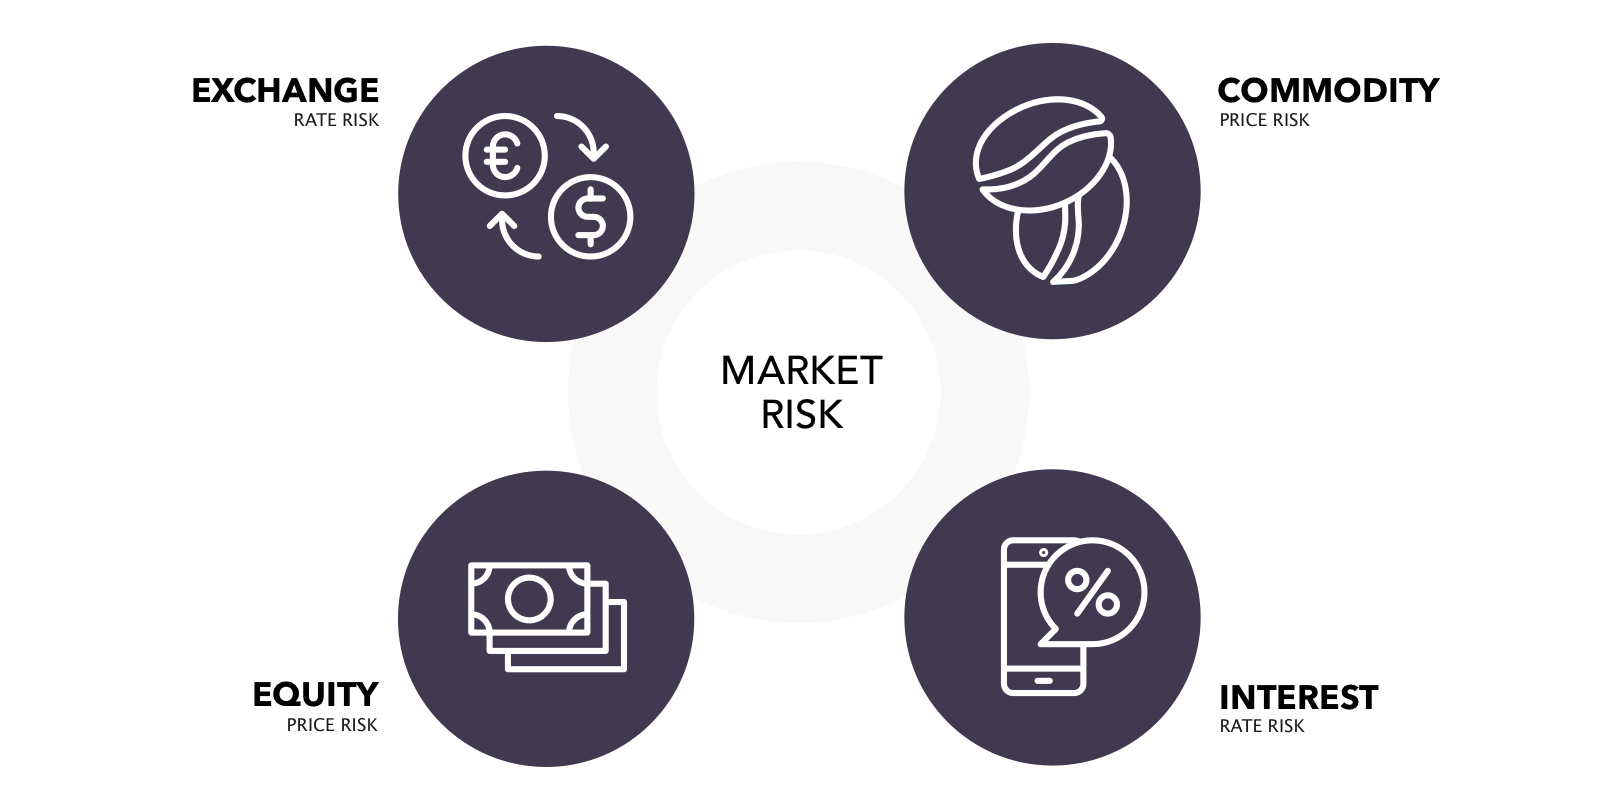 There are four types of market risk